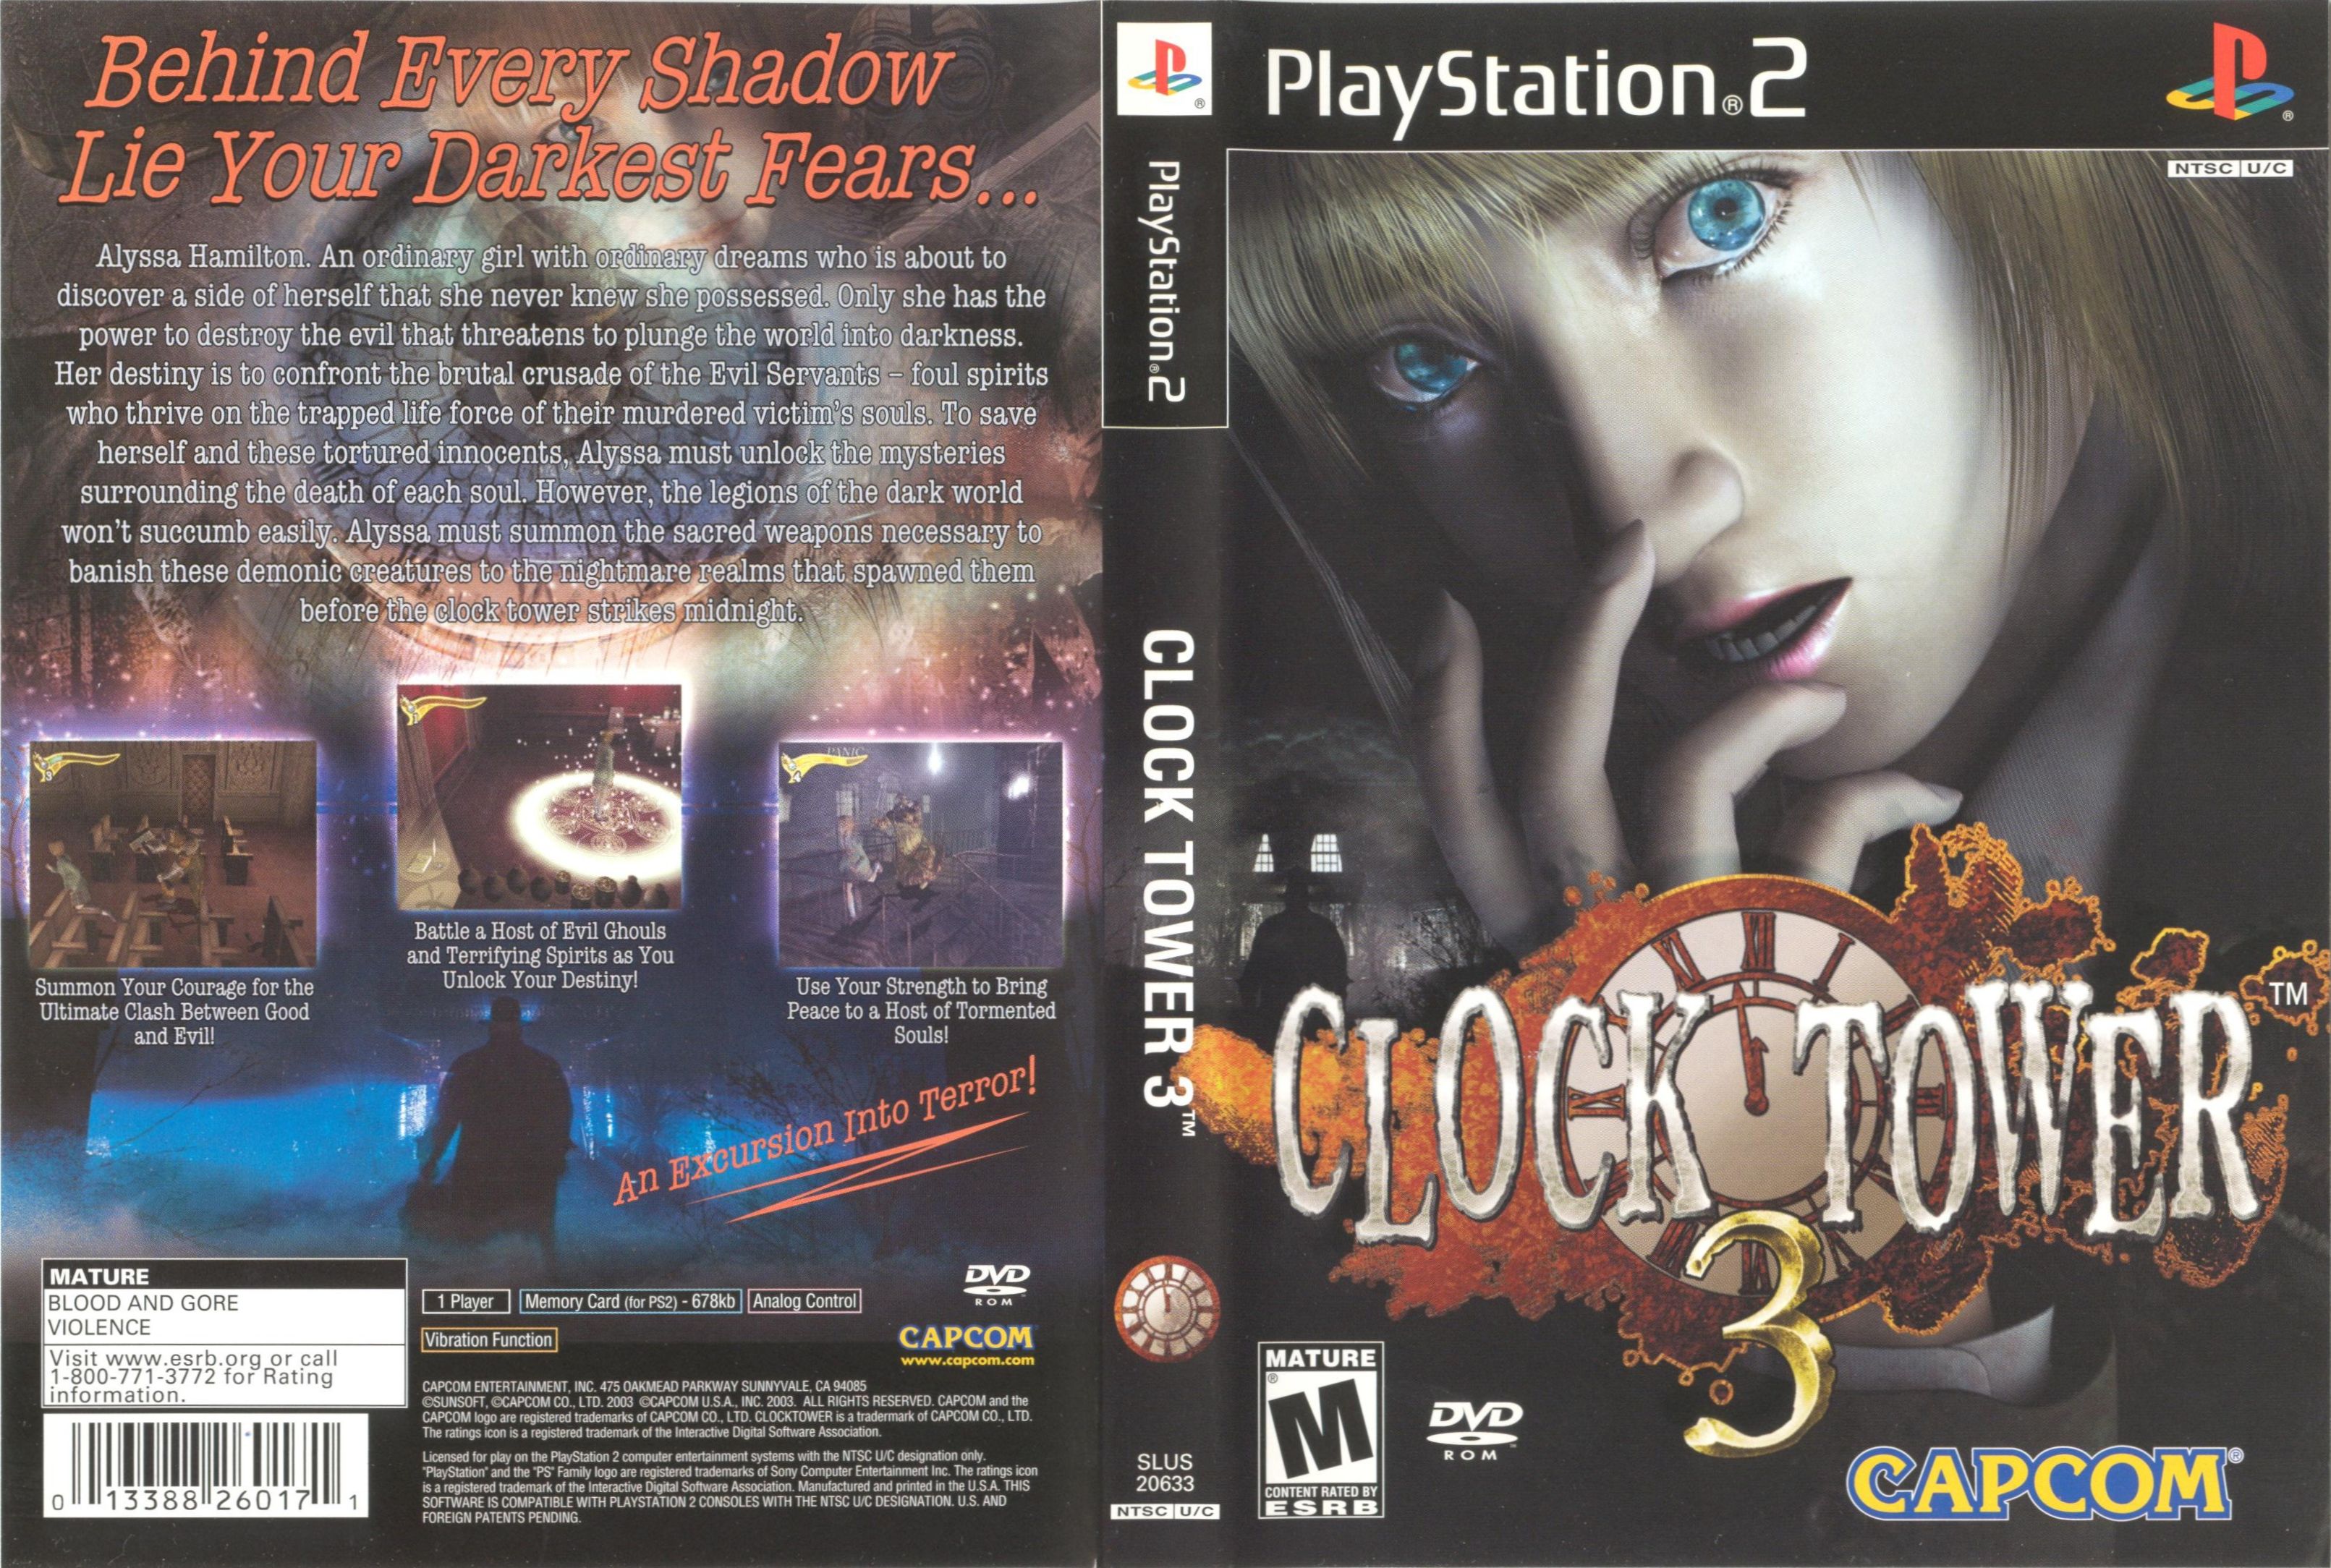 download clock tower playstation 1